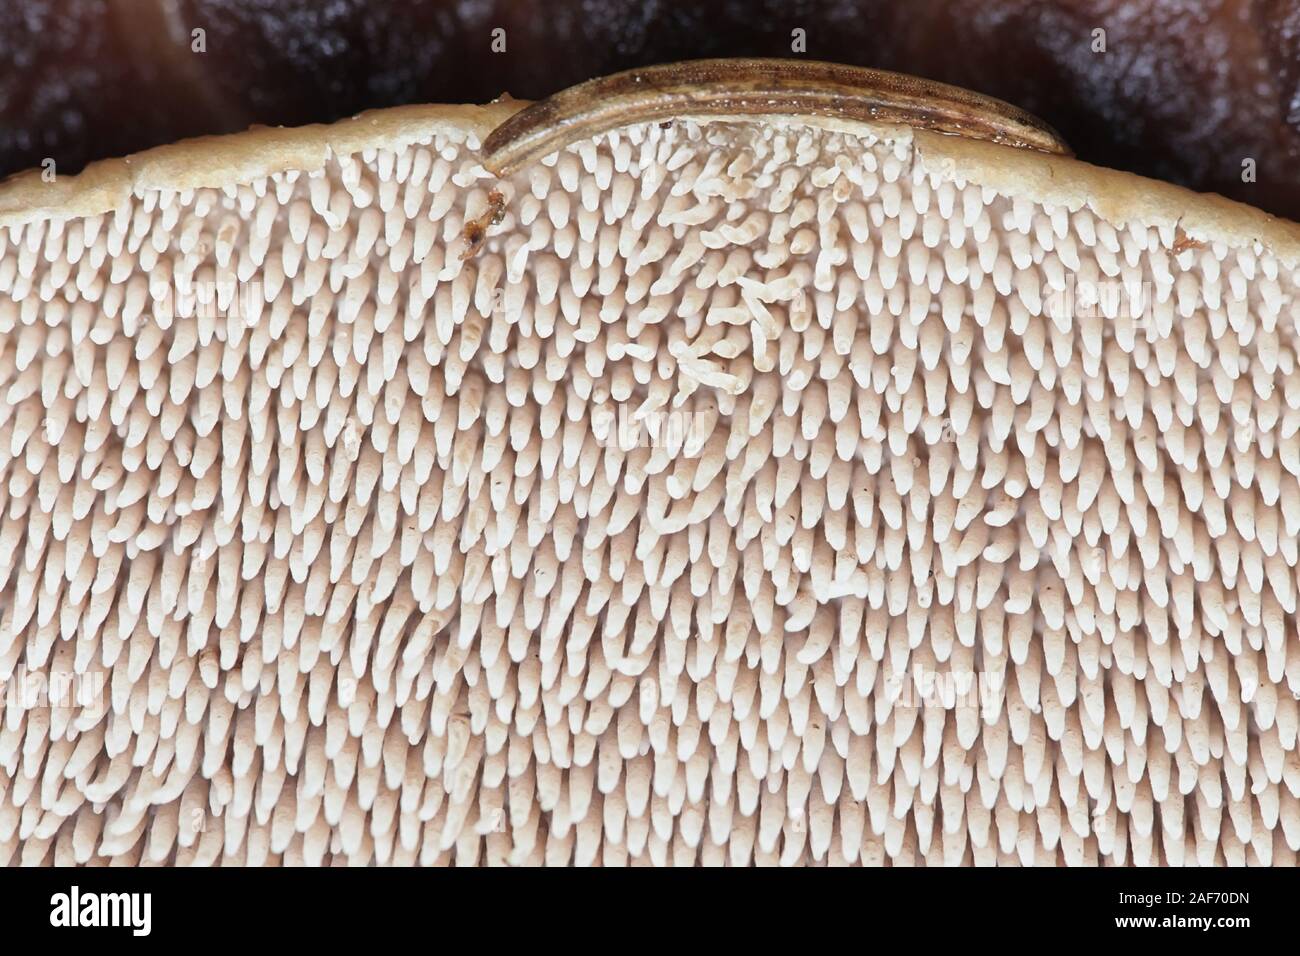 Sarcodon imbricatus, known as the shingled hedgehog, scaly hedgehog or  Scaly Tooth, underside of a tooth fungus from Finland Stock Photo